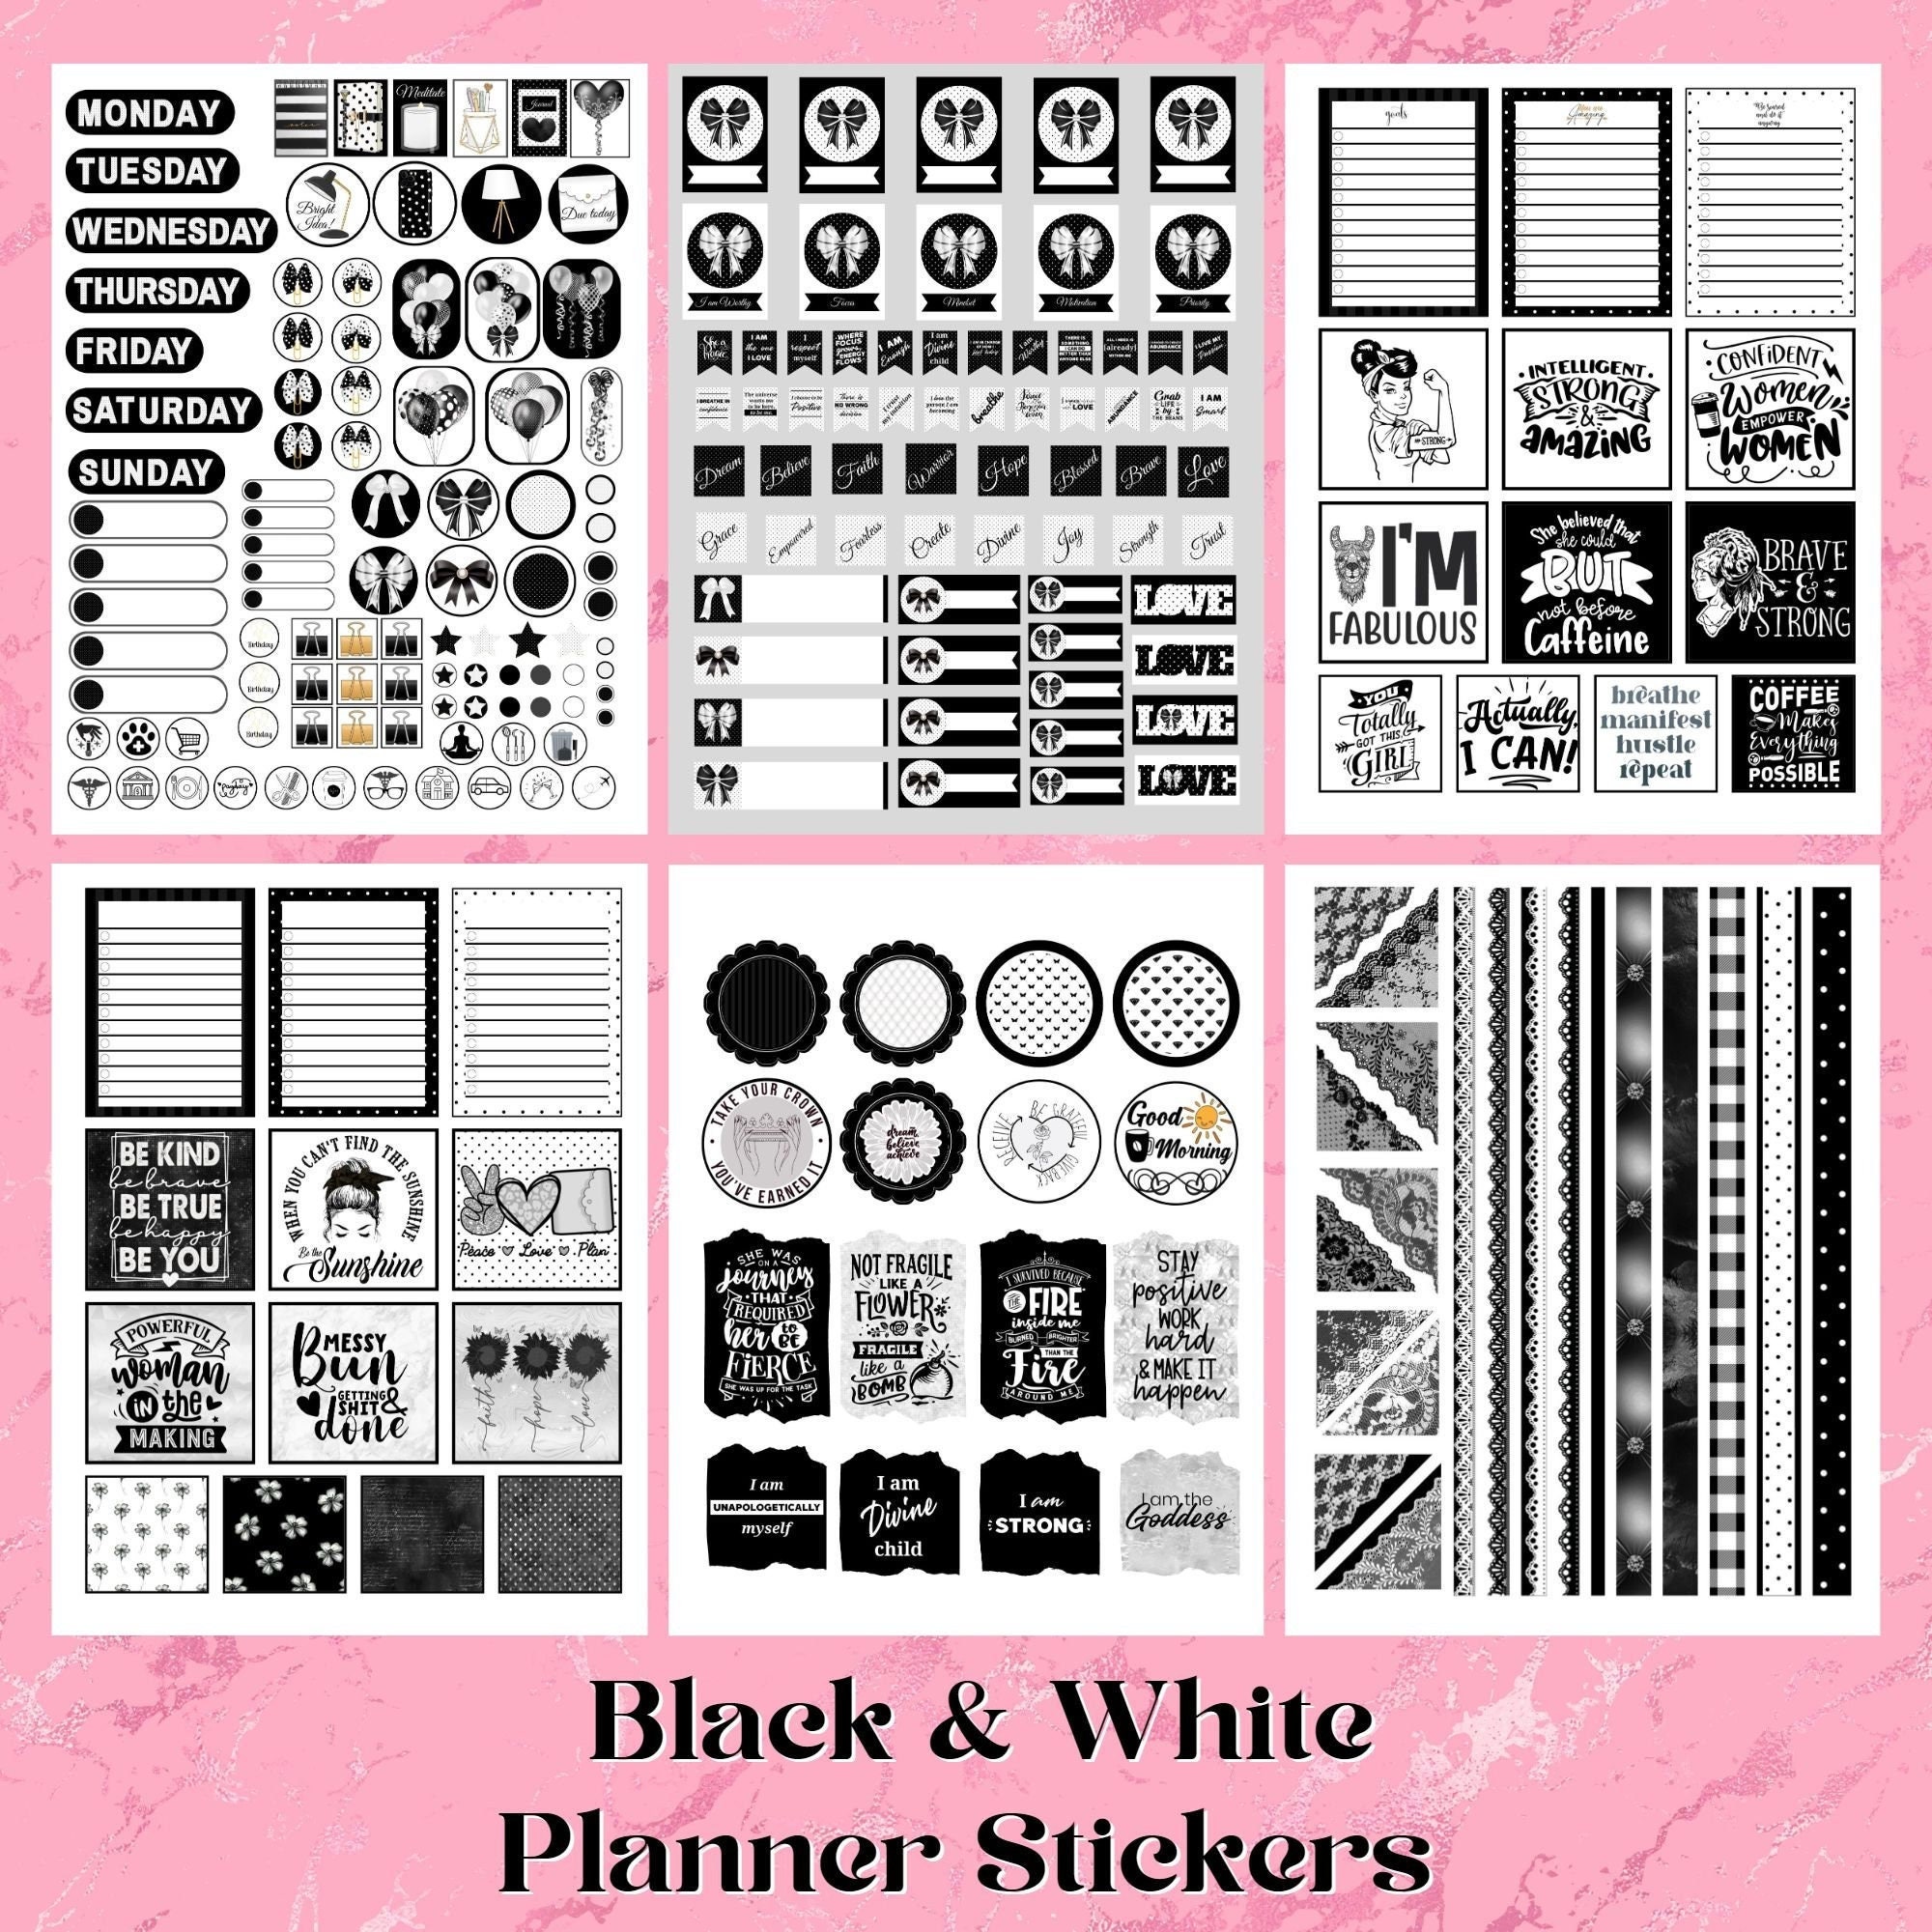 Crafter's Square 300 Planner Stickers ~ To Do Pink Black Gold White